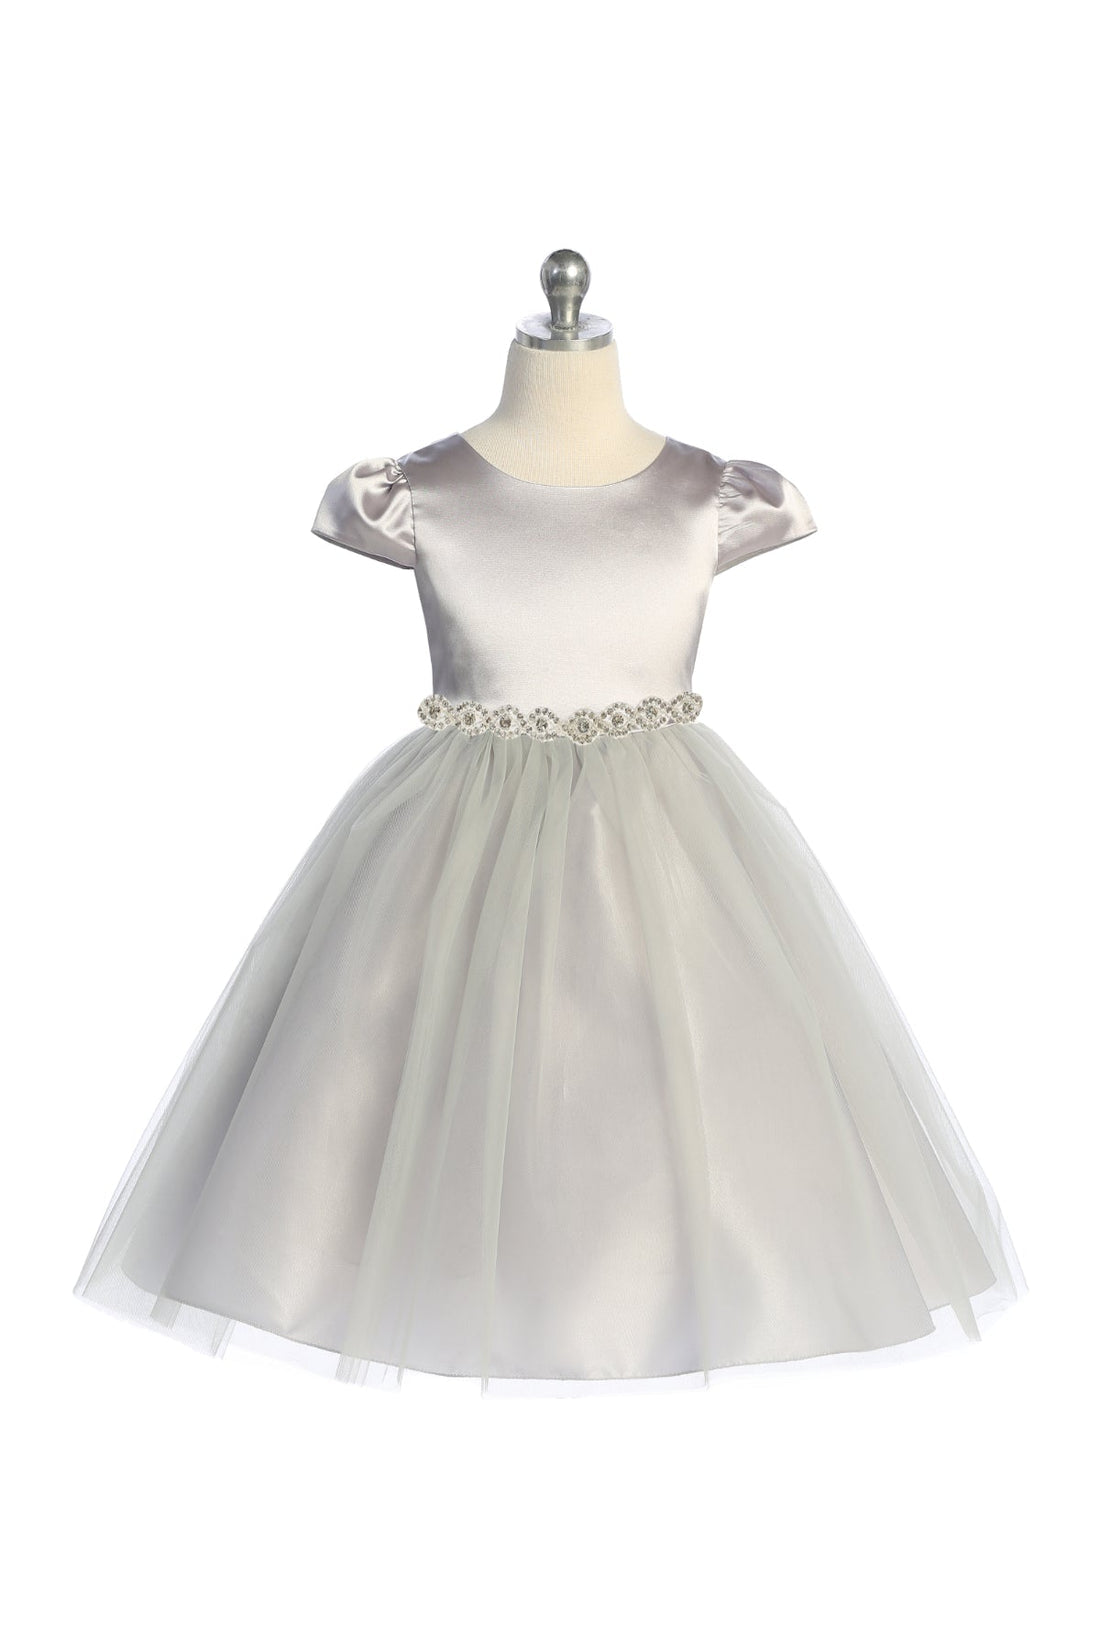 AS452 Kids Dream Girl's Sleeve Party Dress